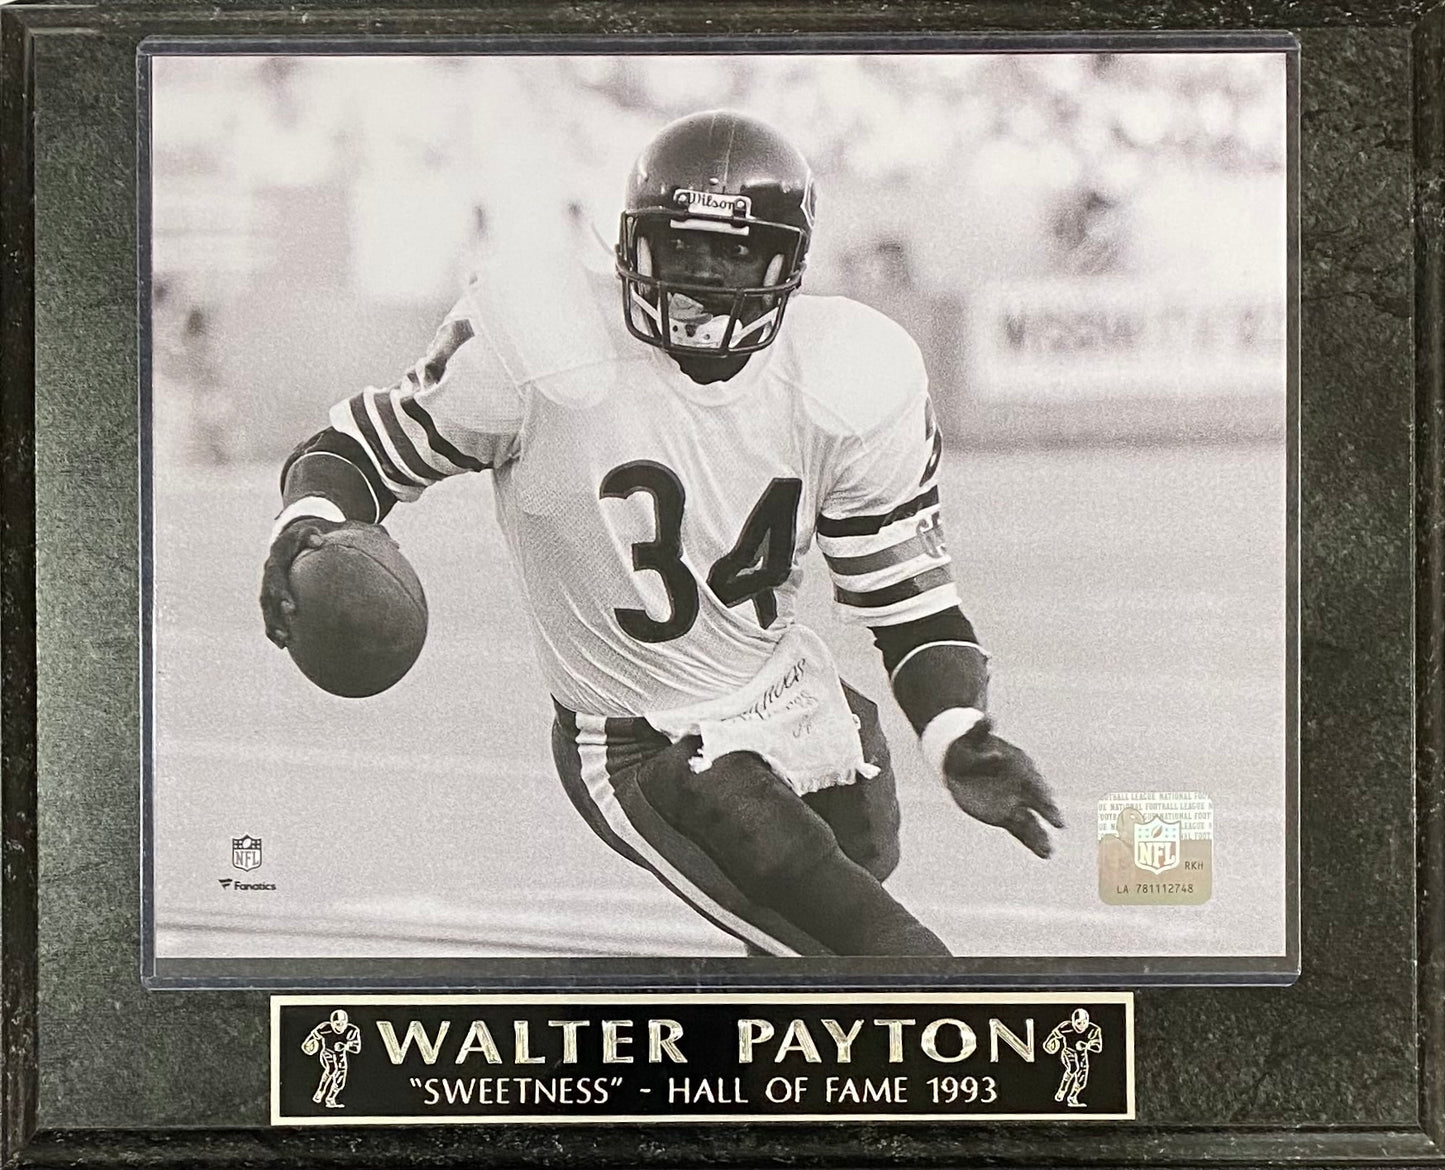 Walter Payton "Sweetness" Hall of Fame 1993 Chicago Bears Plaque